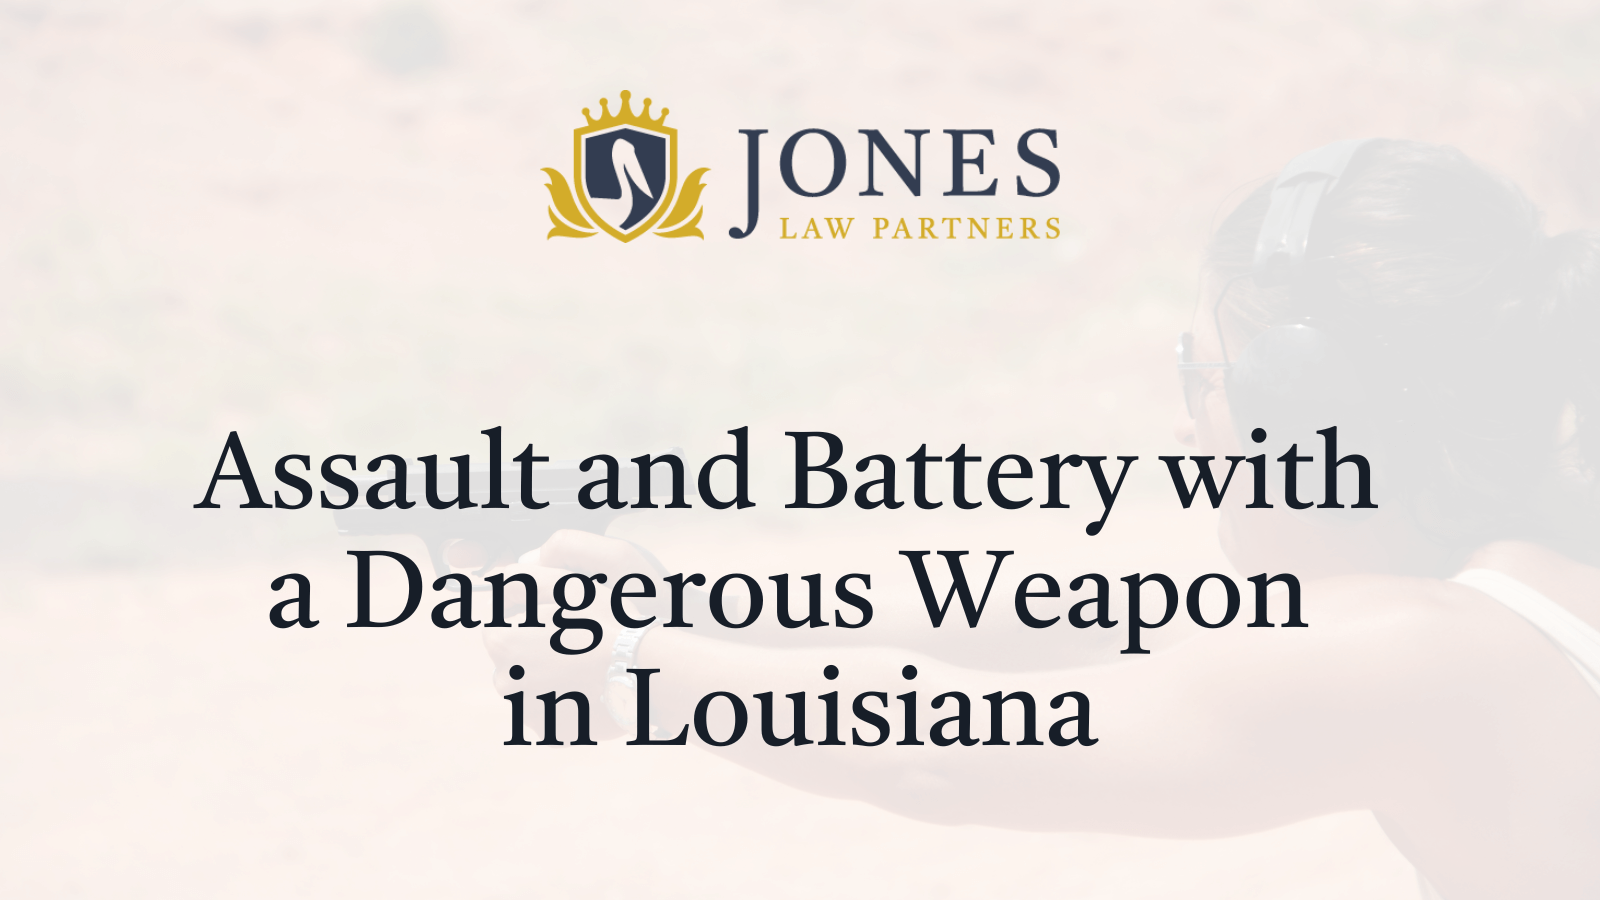 Assault and Battery with a Dangerous Weapon in Louisiana - Jones Law Partners - alexandria louisiana